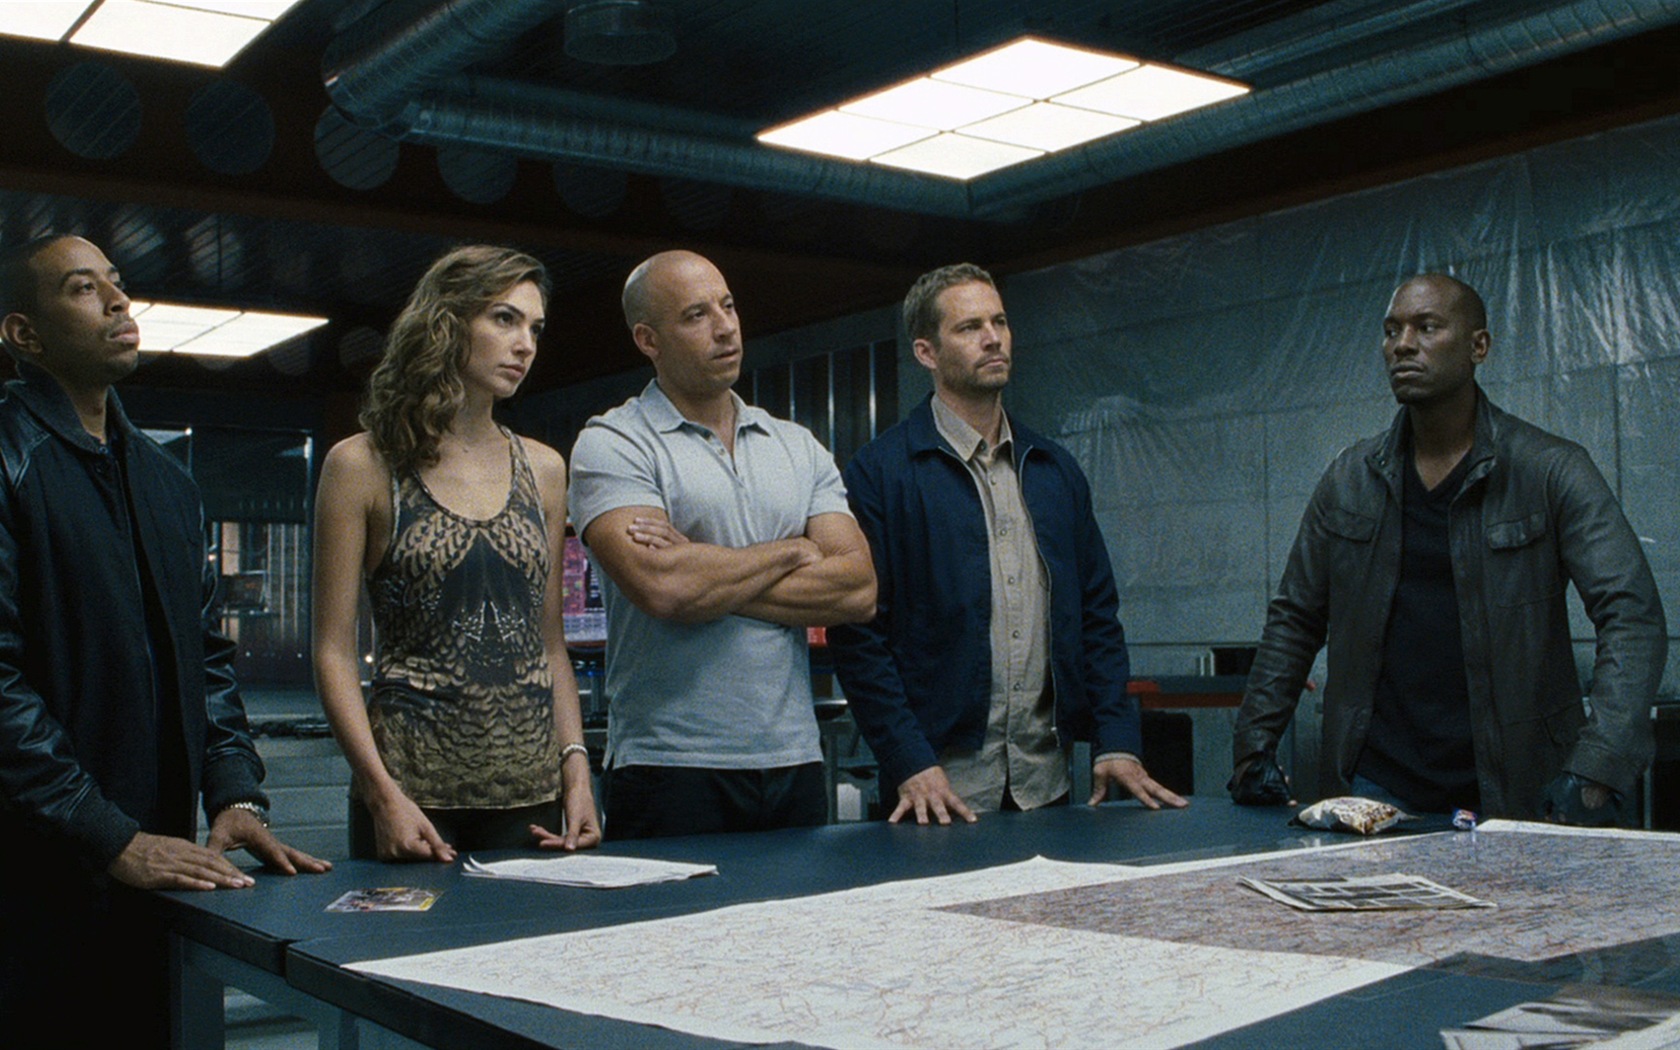 Fast And Furious 6 HD movie wallpapers #2 - 1680x1050